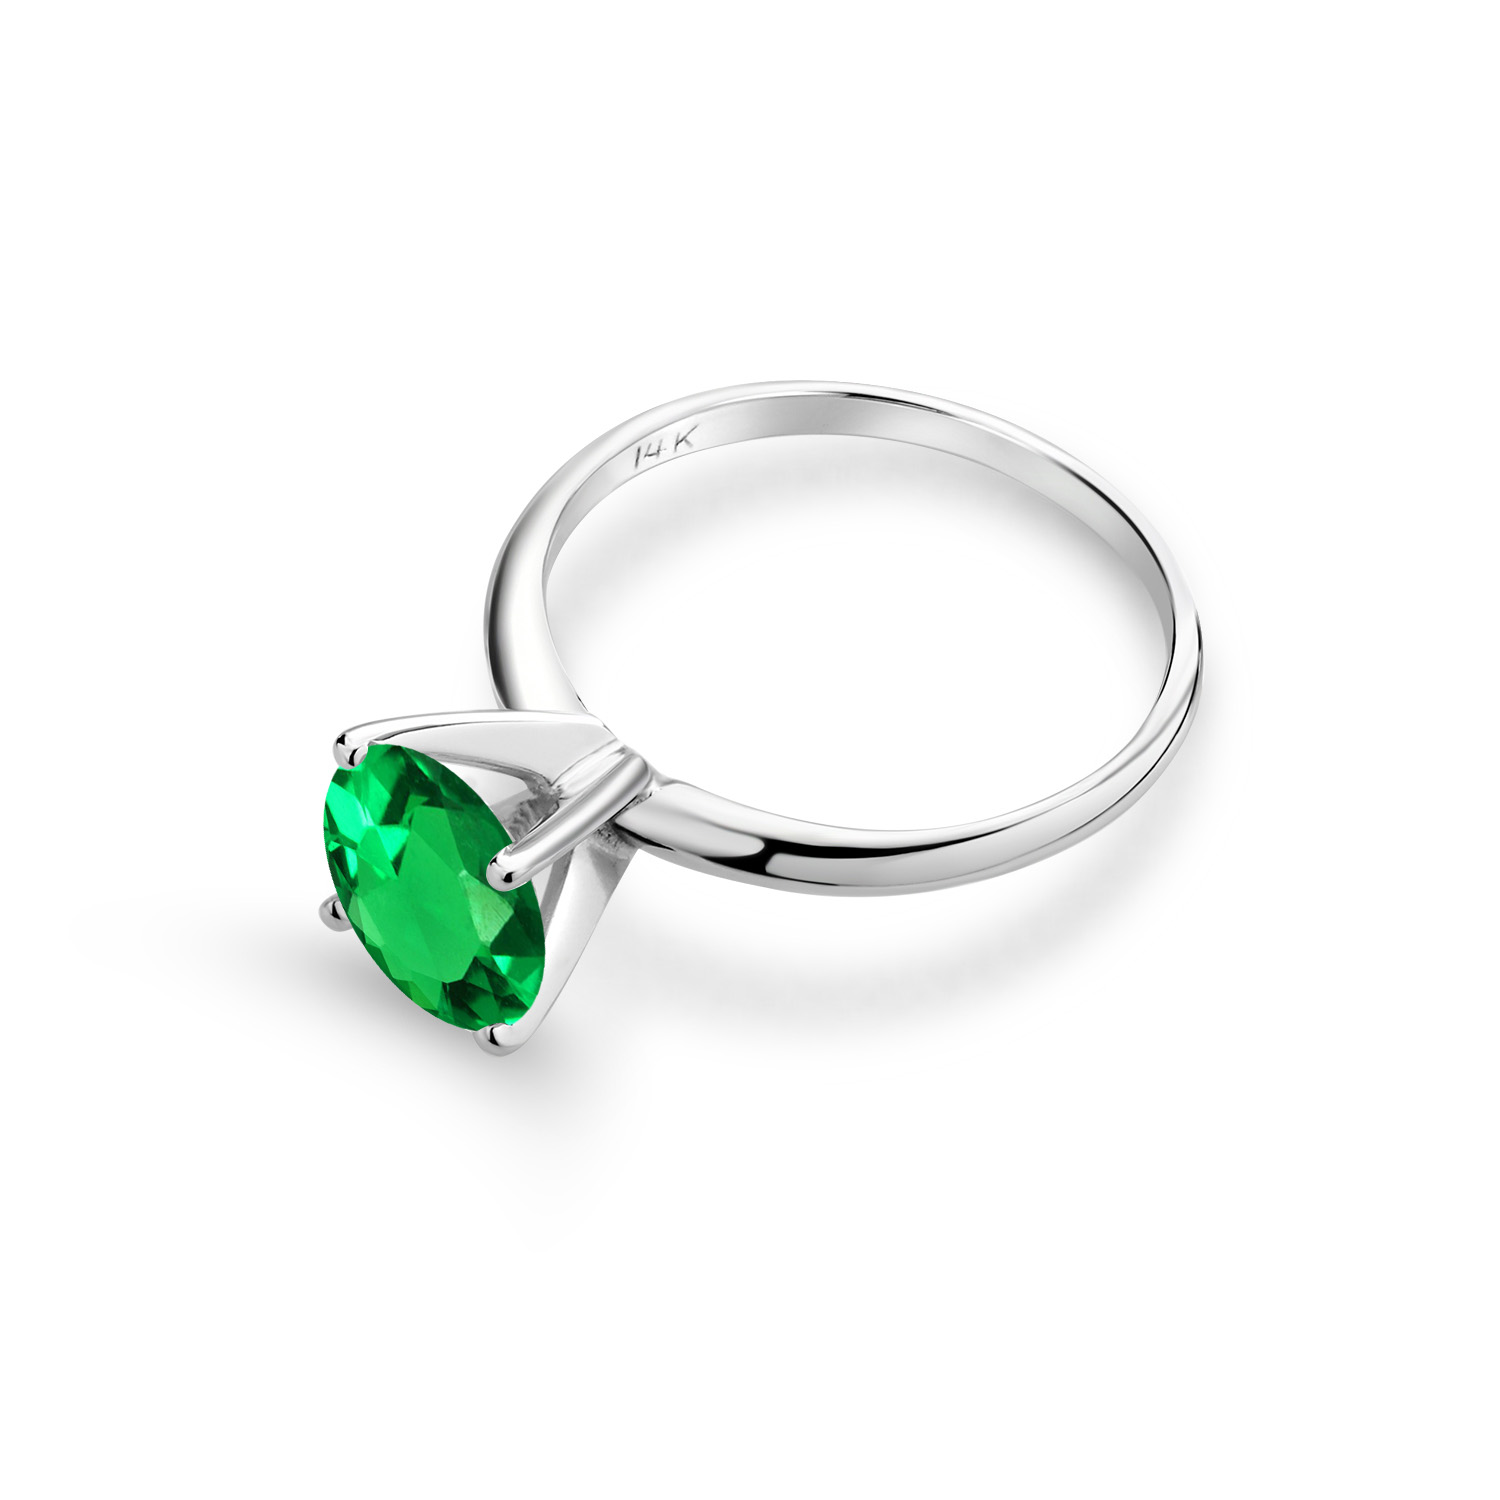 Gem Stone King 14K White Gold 1.65 Ct Round Green Simulated Emerald Women Solitaire Engagement Ring